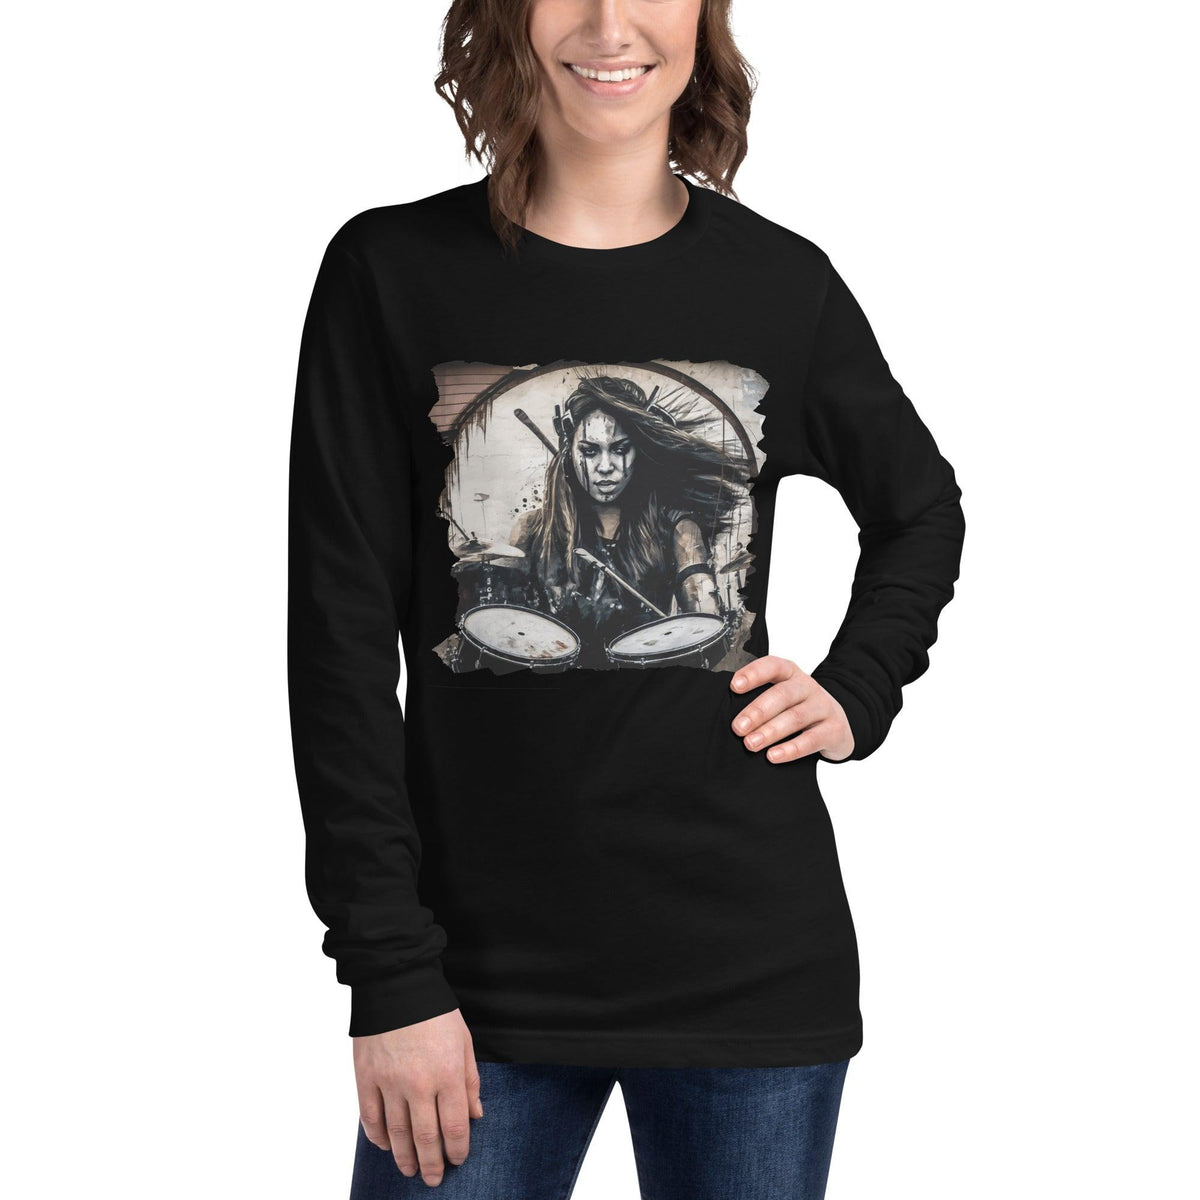 She Owns The Stage Unisex Long Sleeve Tee - Beyond T-shirts